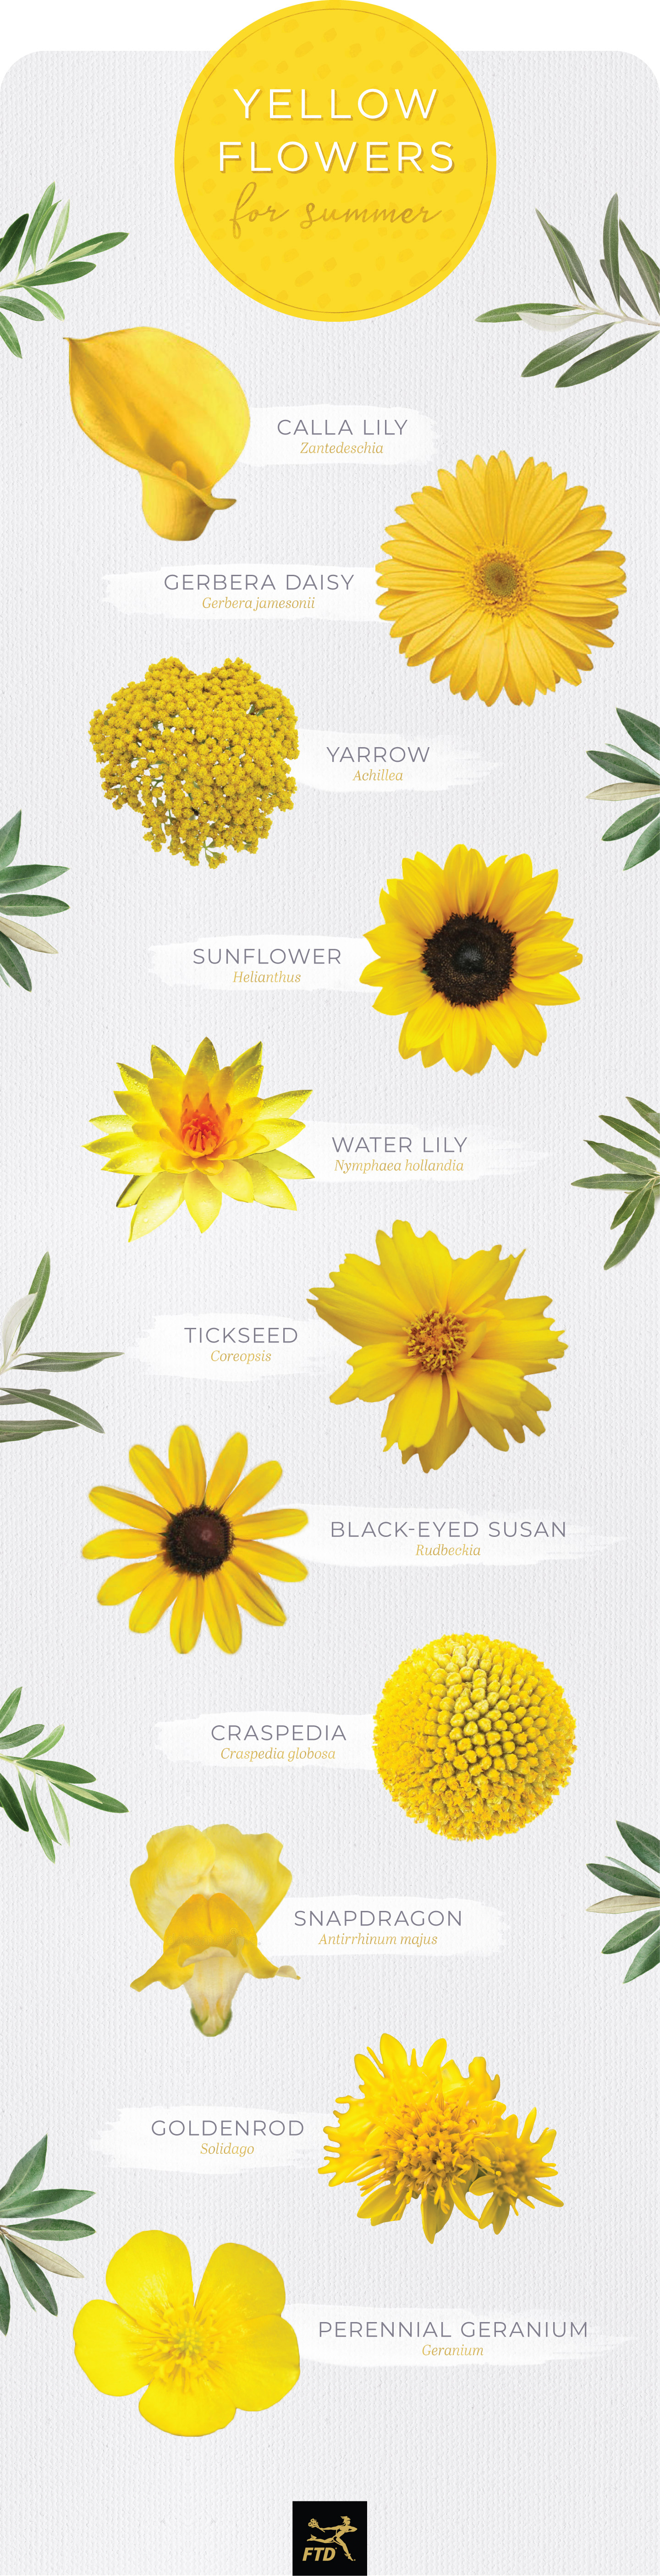 names of purple and yellow flowers